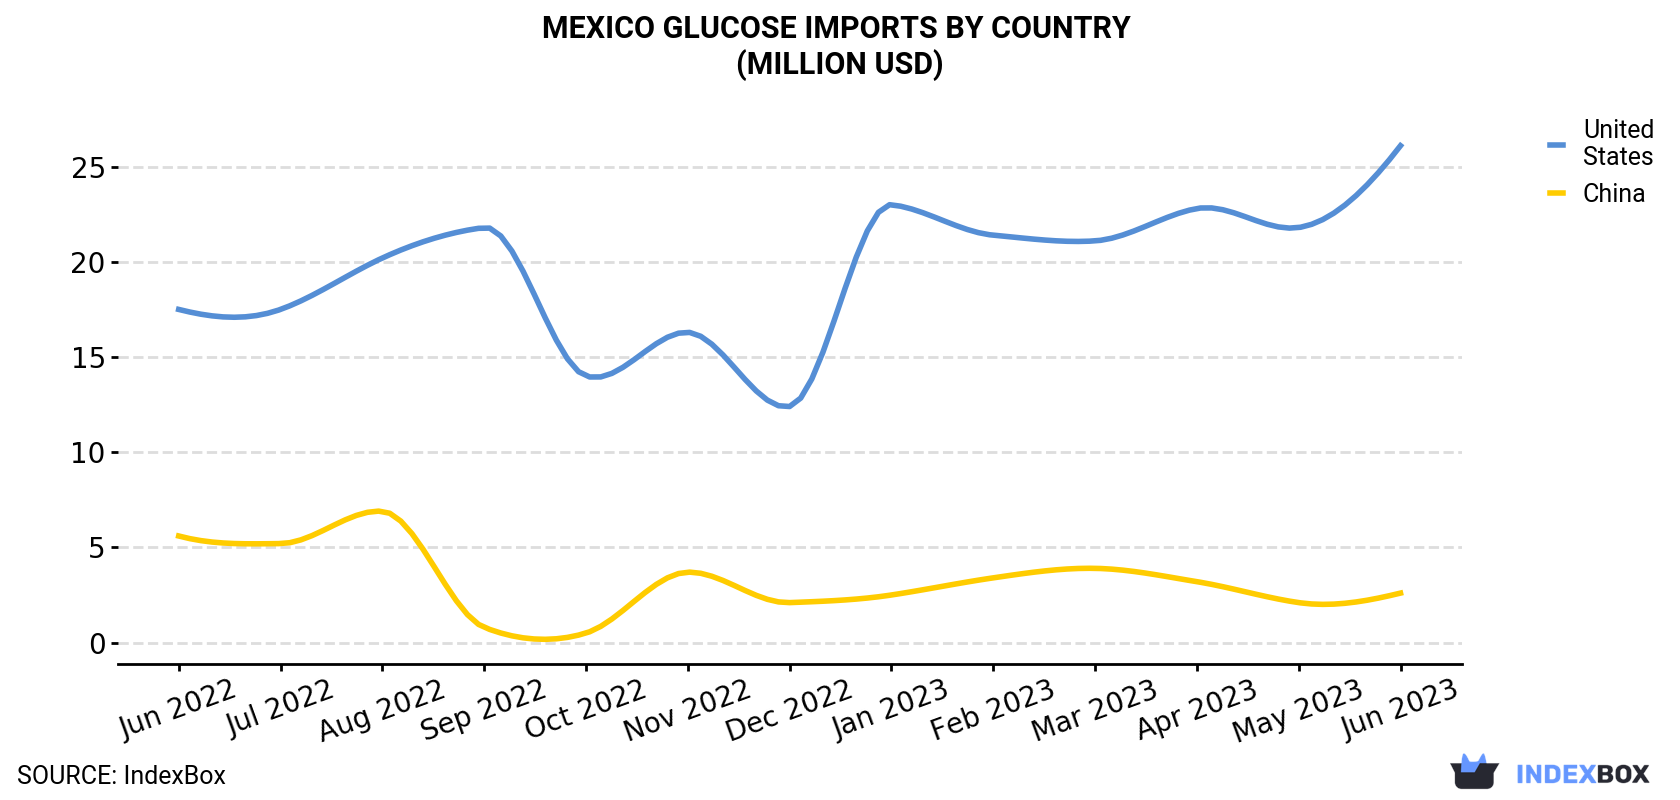 Mexico Glucose Imports By Country (Million USD)